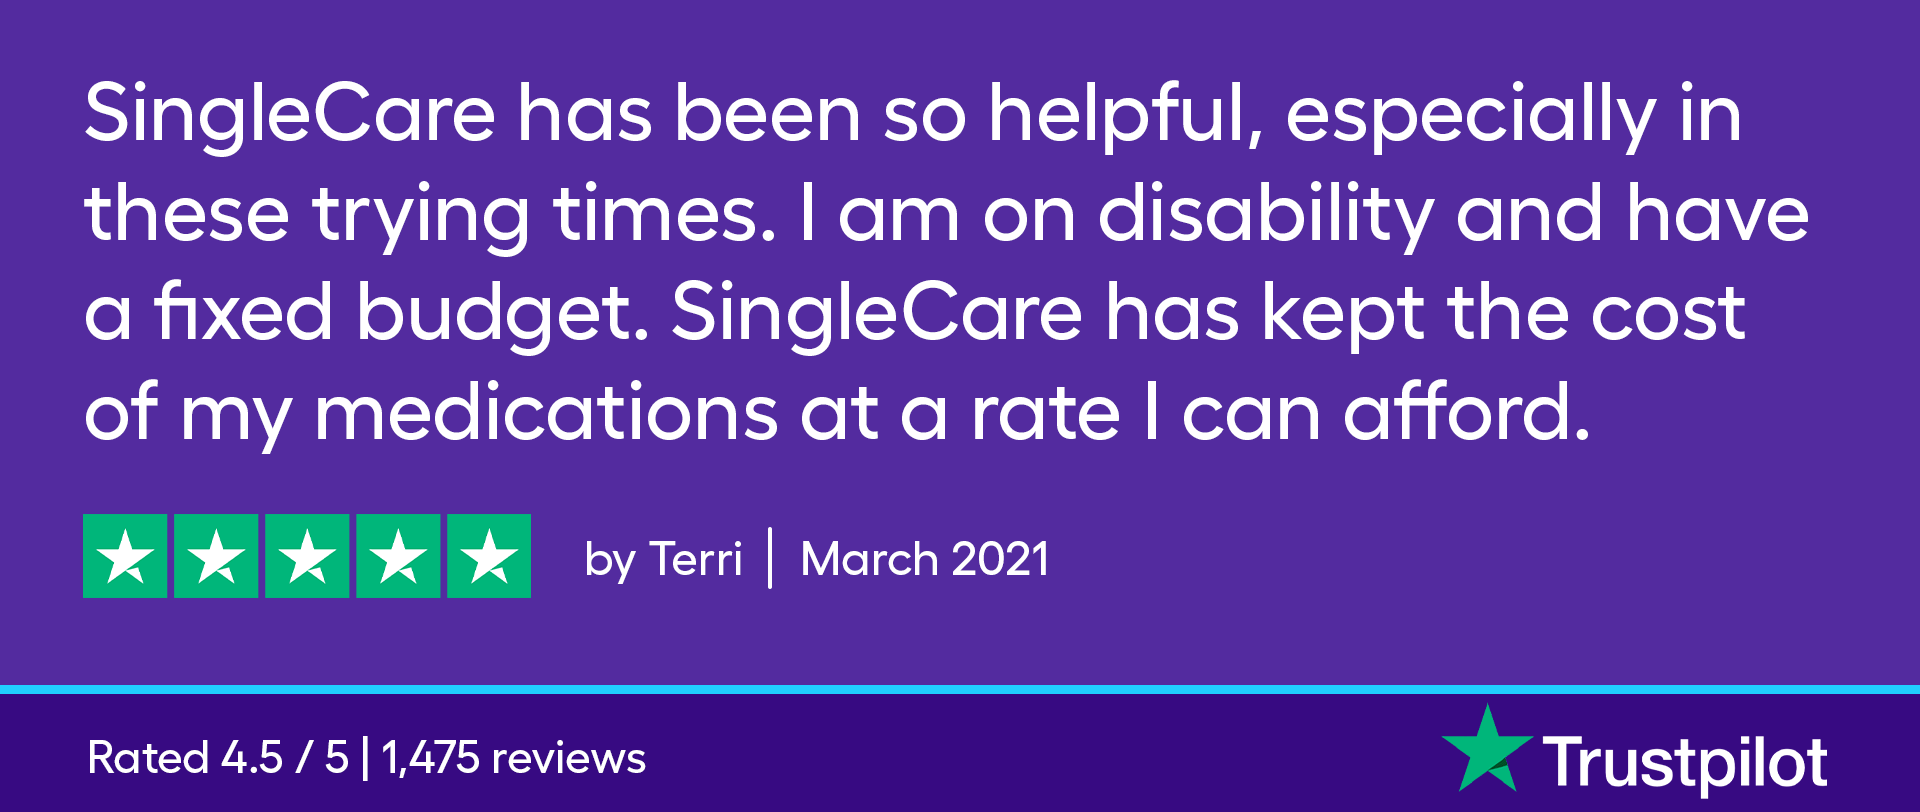 SingleCare has been so helpful, especially in these trying times. I am on disability and have a fixed budget. SingleCare has kept the cost of my medications at a rate I can afford.